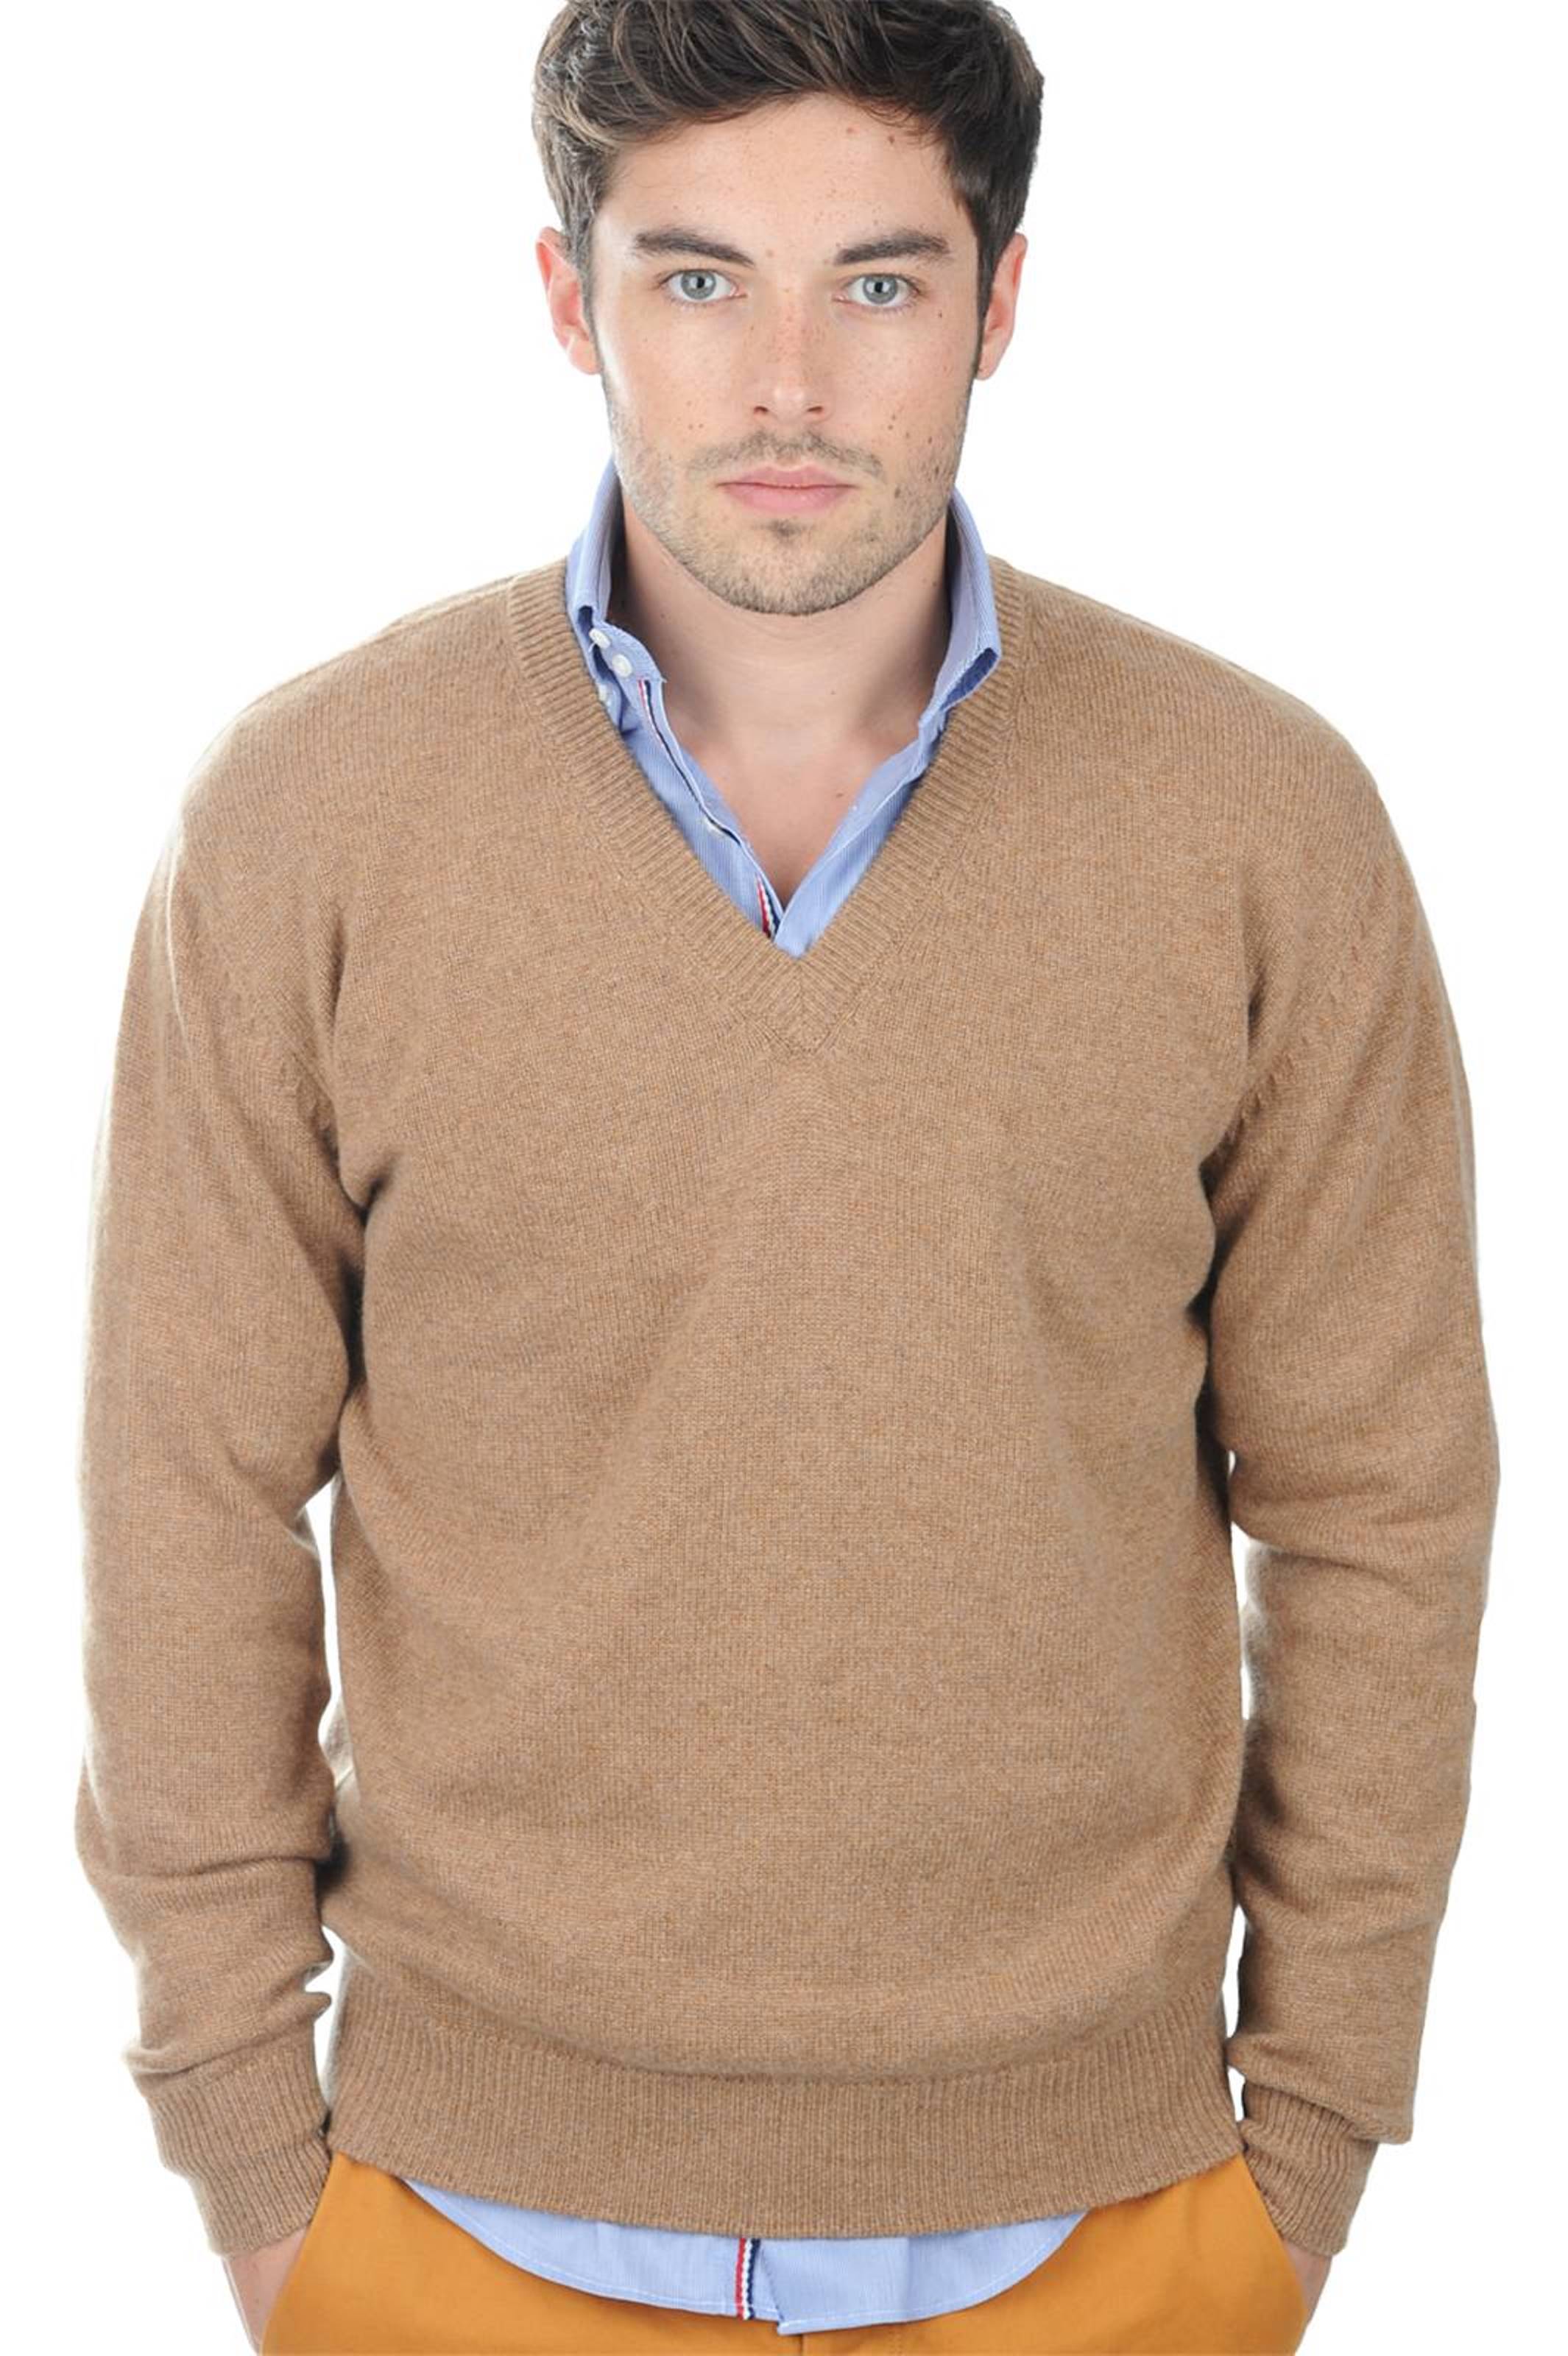 Cachemire pull homme hippolyte 4f camel chine 4xl